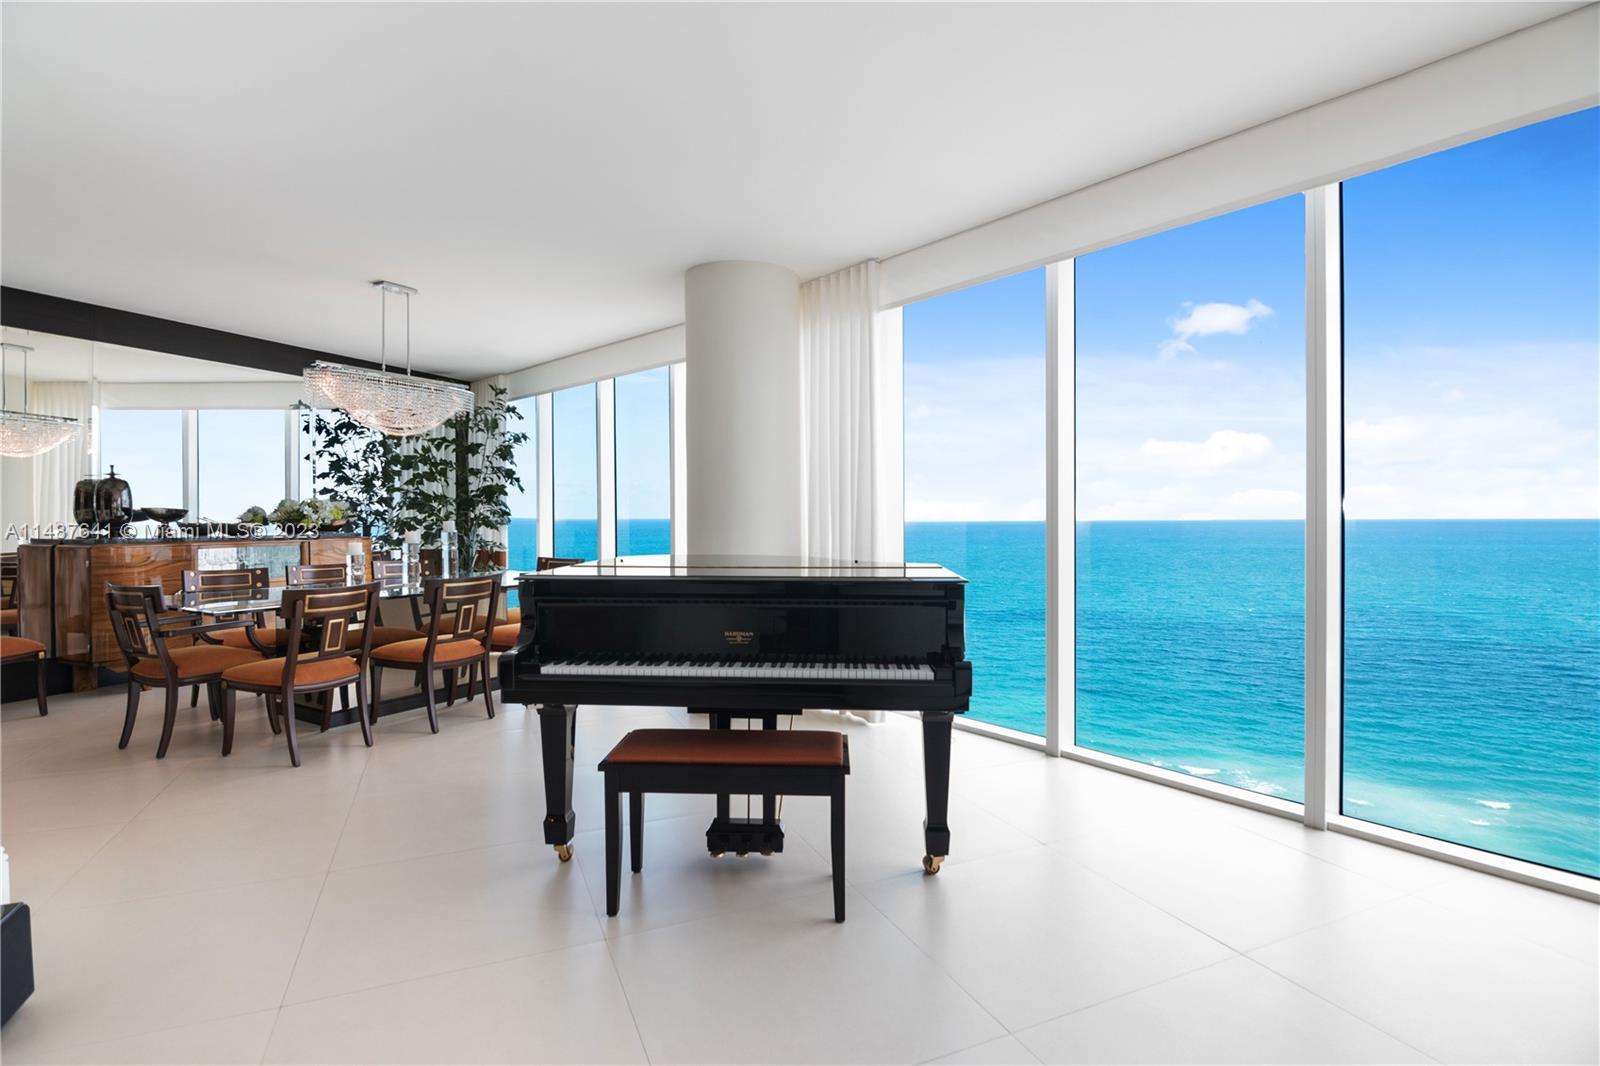 Photo of 2711 S Ocean Dr #2205 in Hollywood, FL